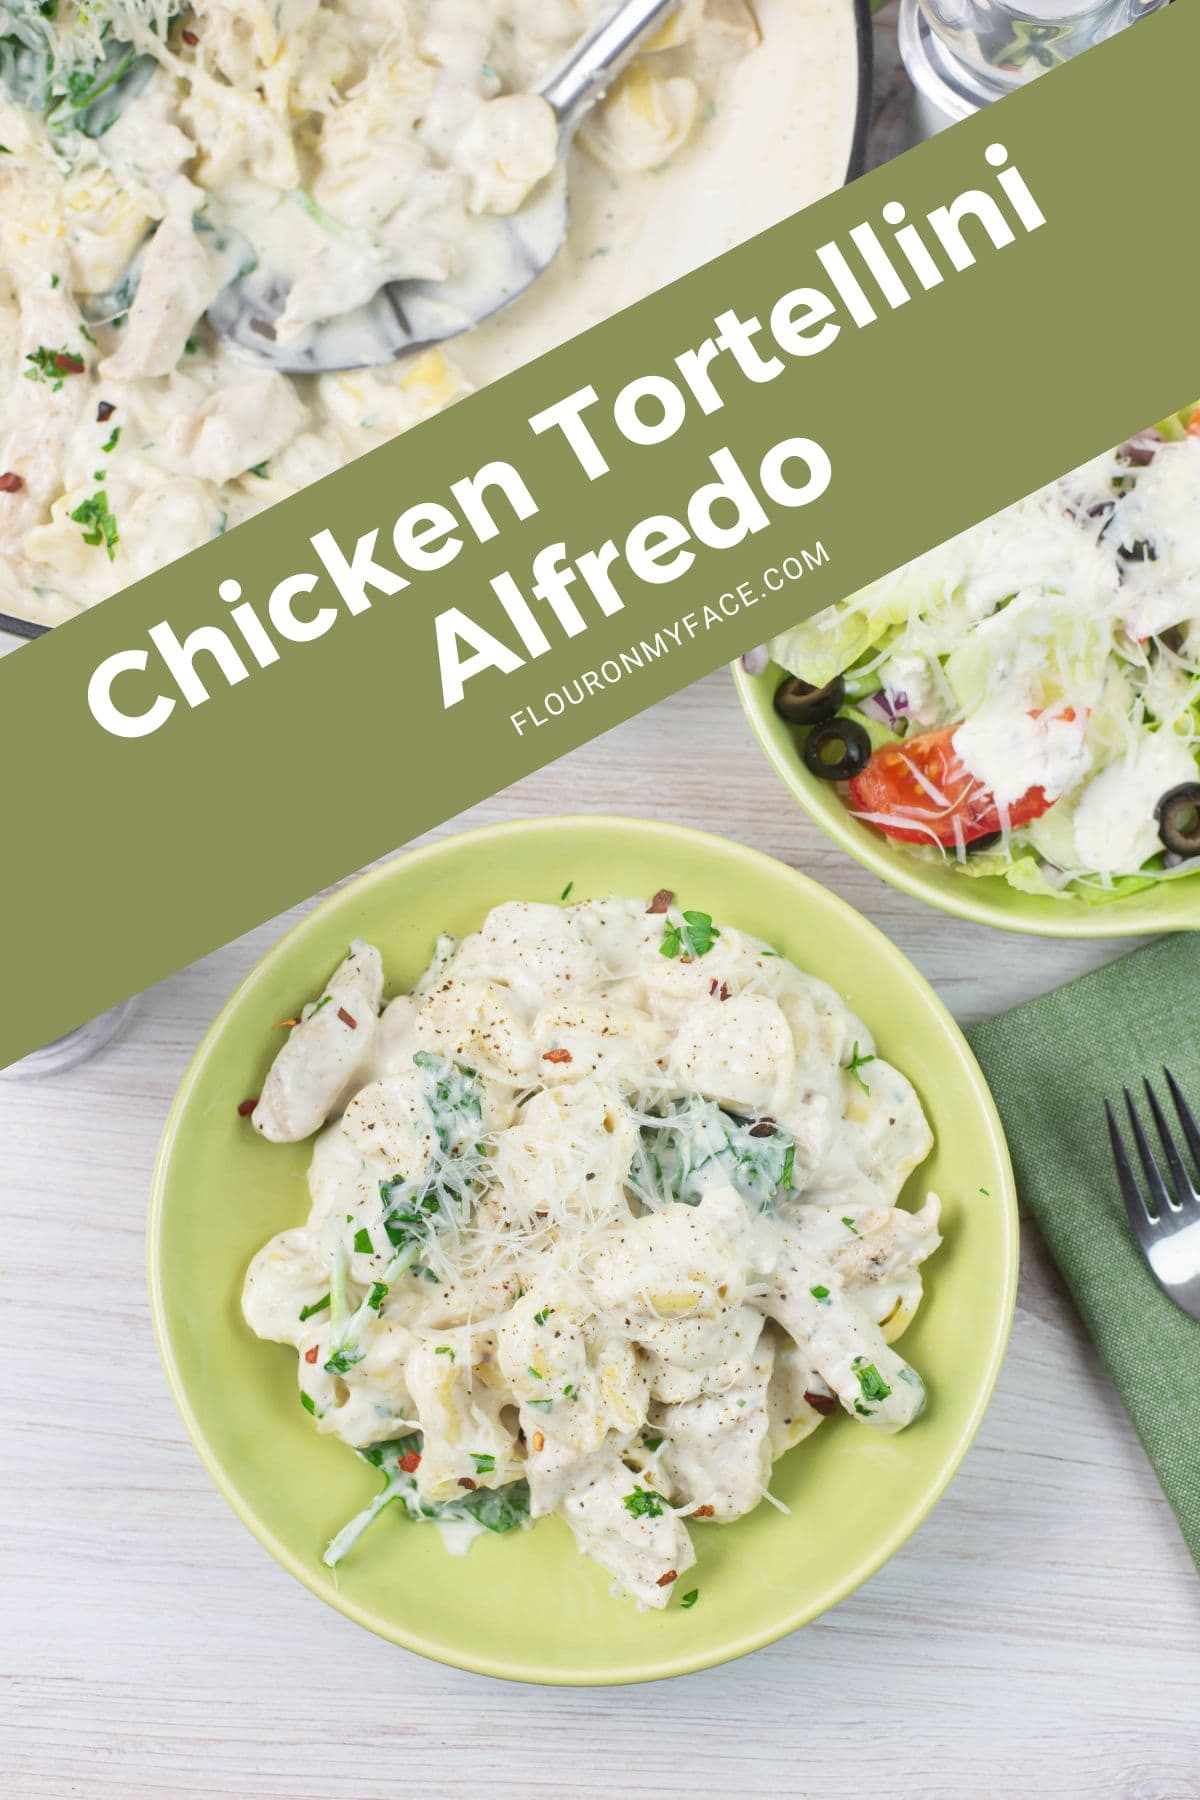 Tall vertical featured image of a serving of chicken tortellini alfredo with a side salad.